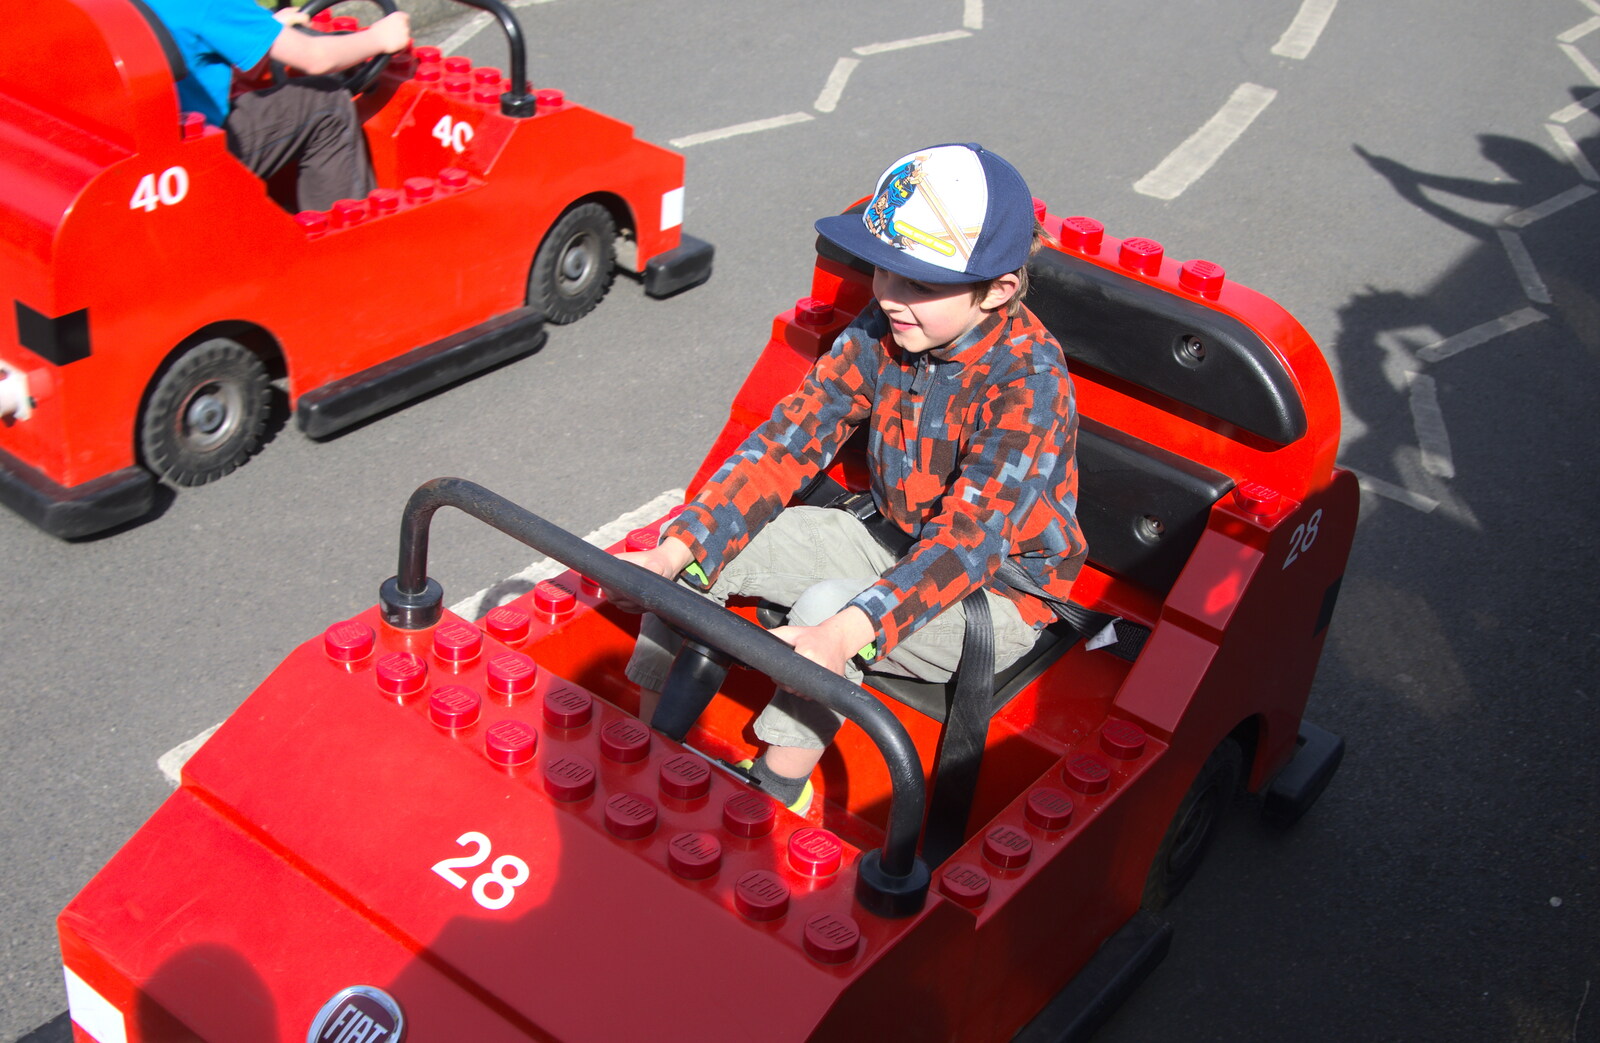 Lego cars in action from A Trip to Legoland, Windsor, Berkshire - 25th March 2017